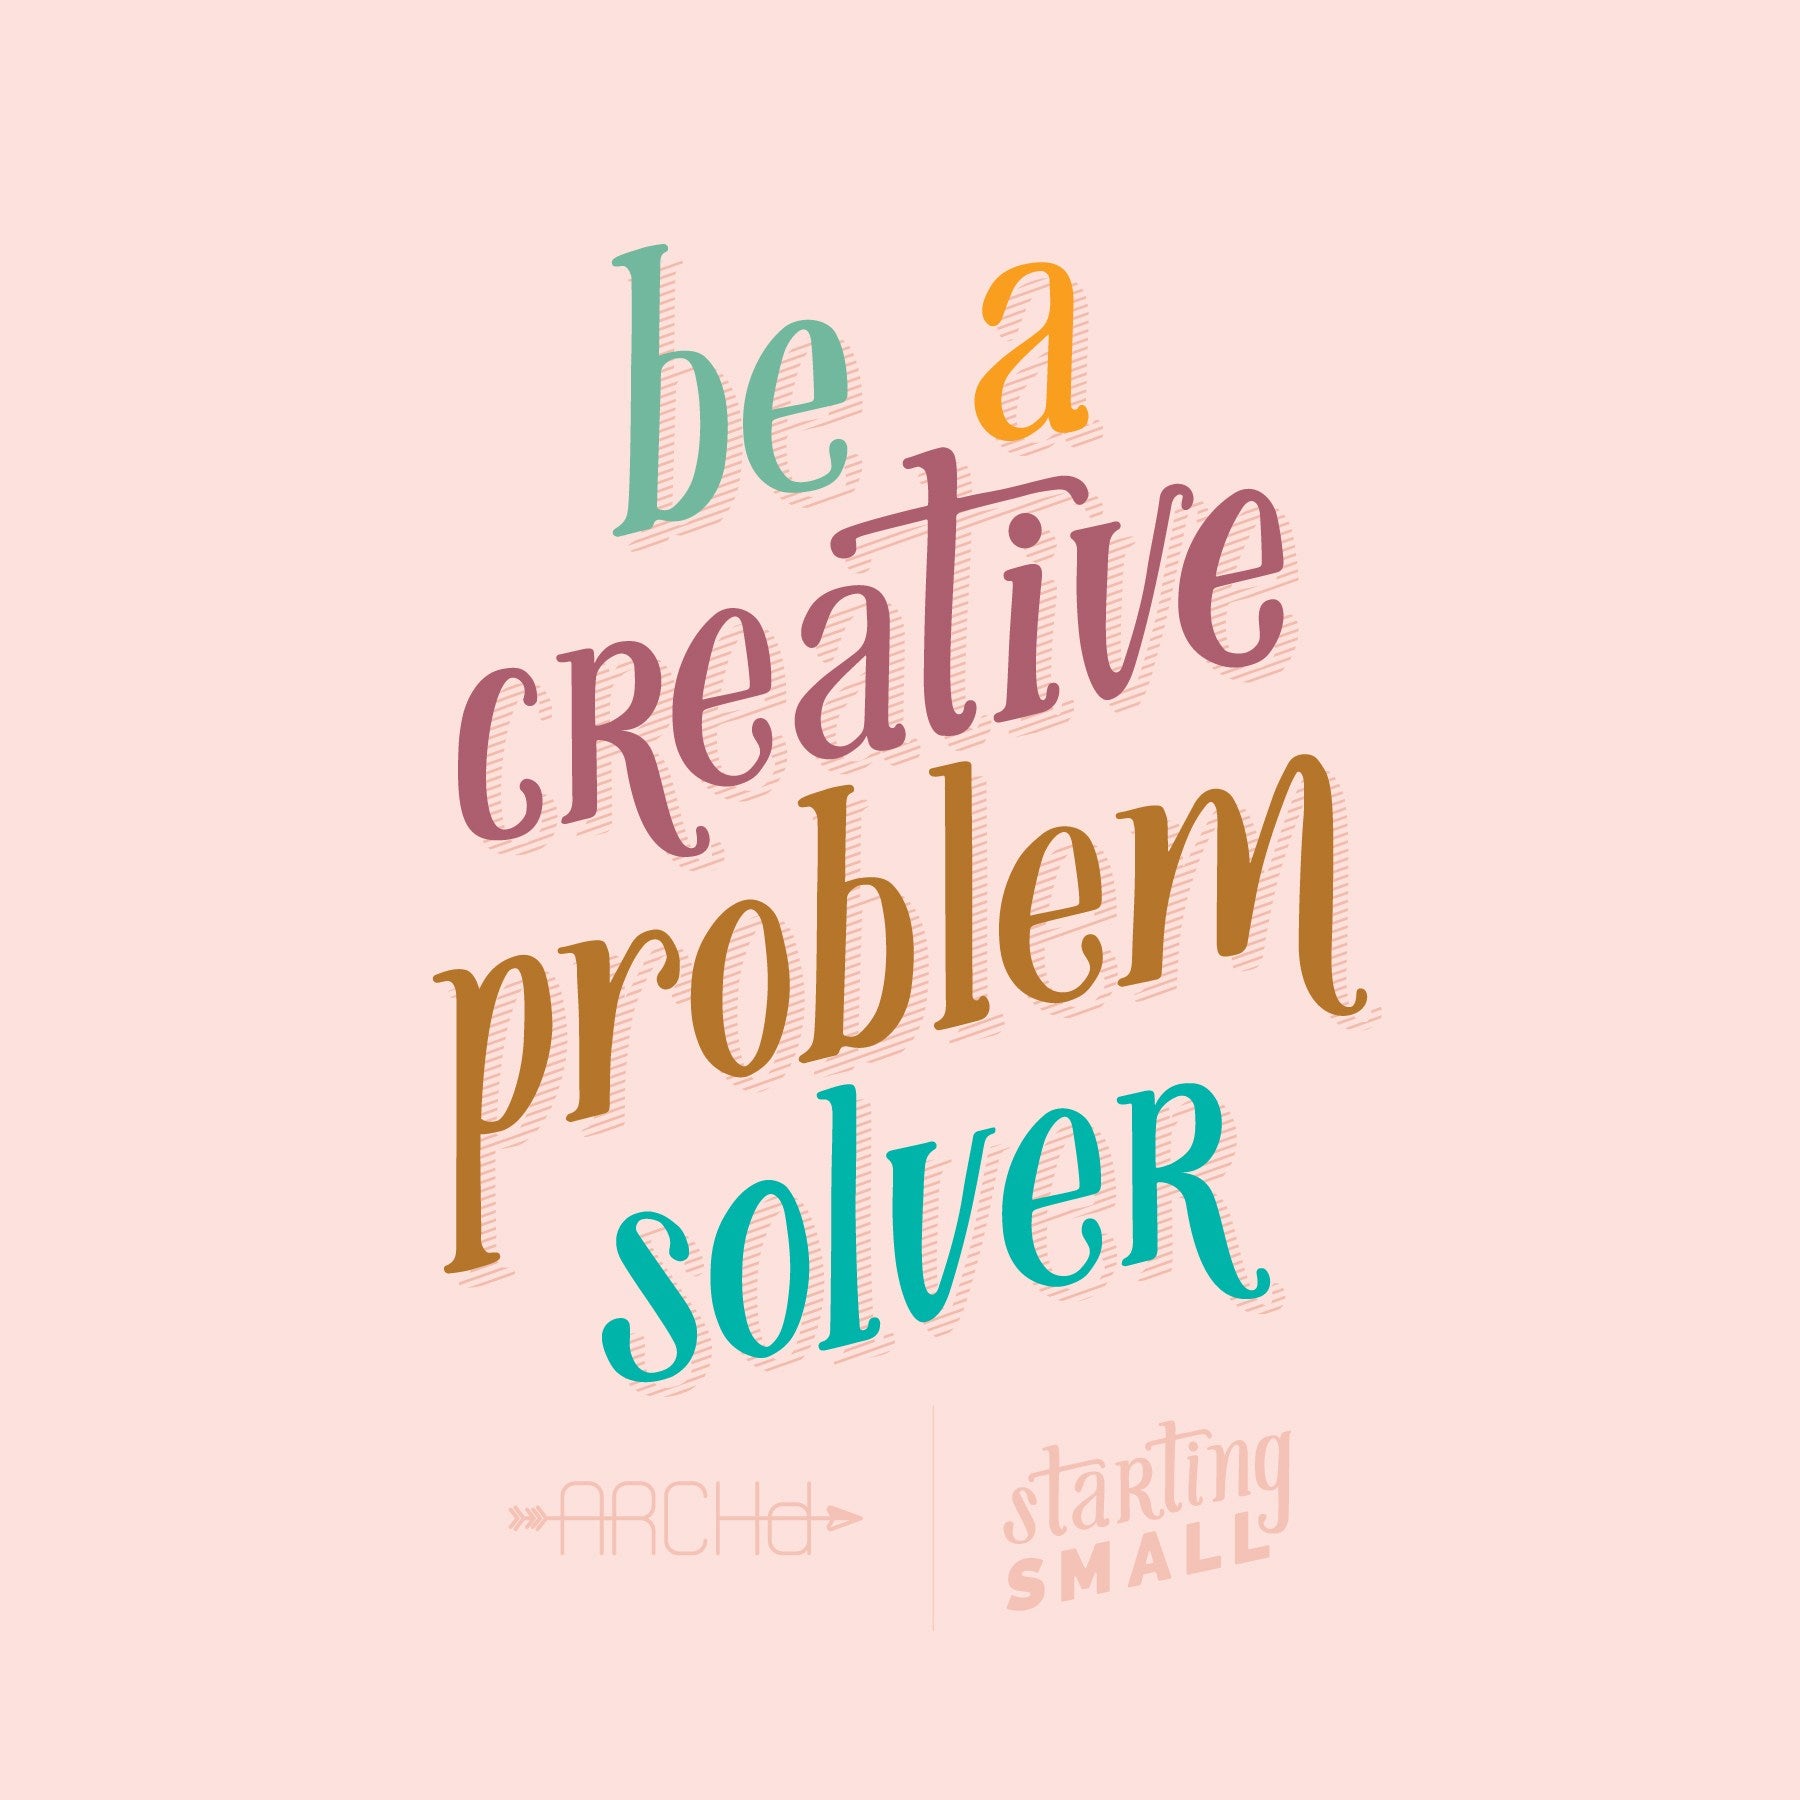 Be a creative problem solver starting small a blog series by ARCHd about the adventures of starting a small business